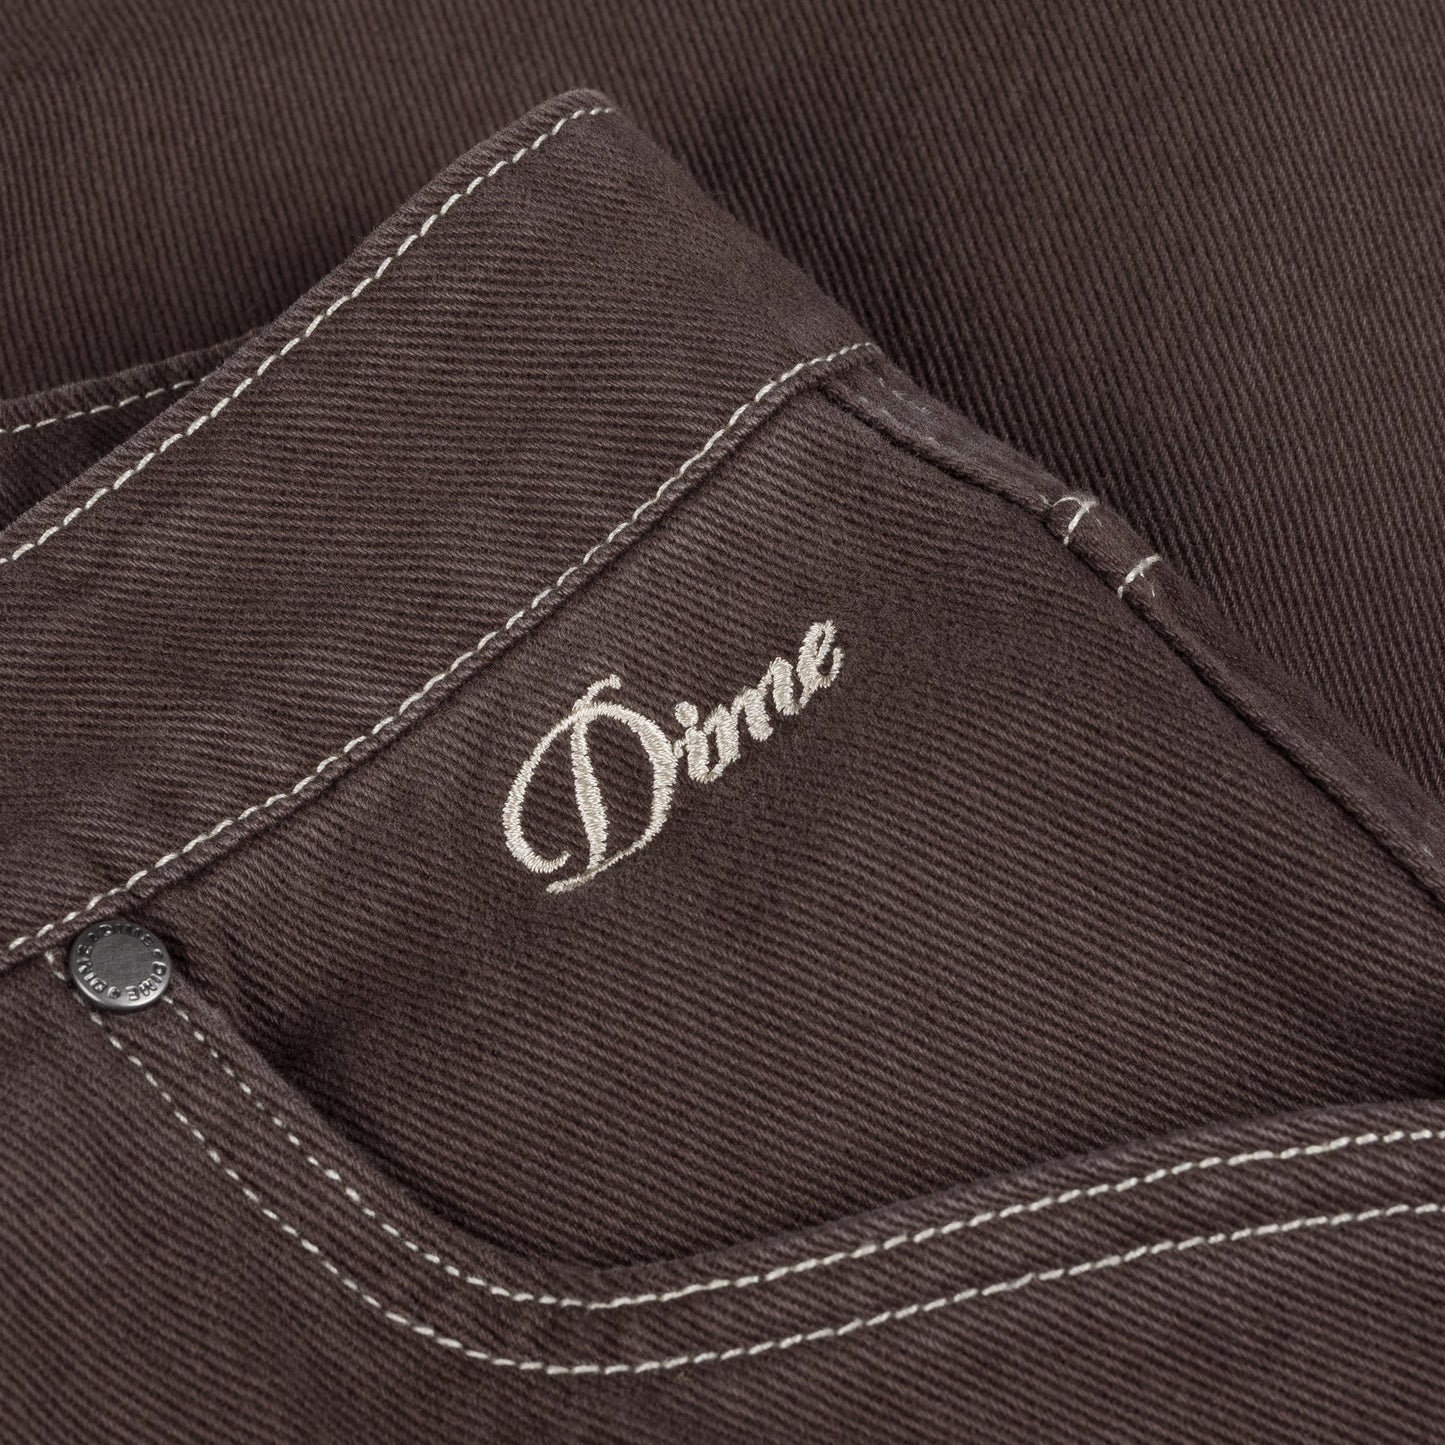 Dime Classic Denim Shorts: Brown Washed